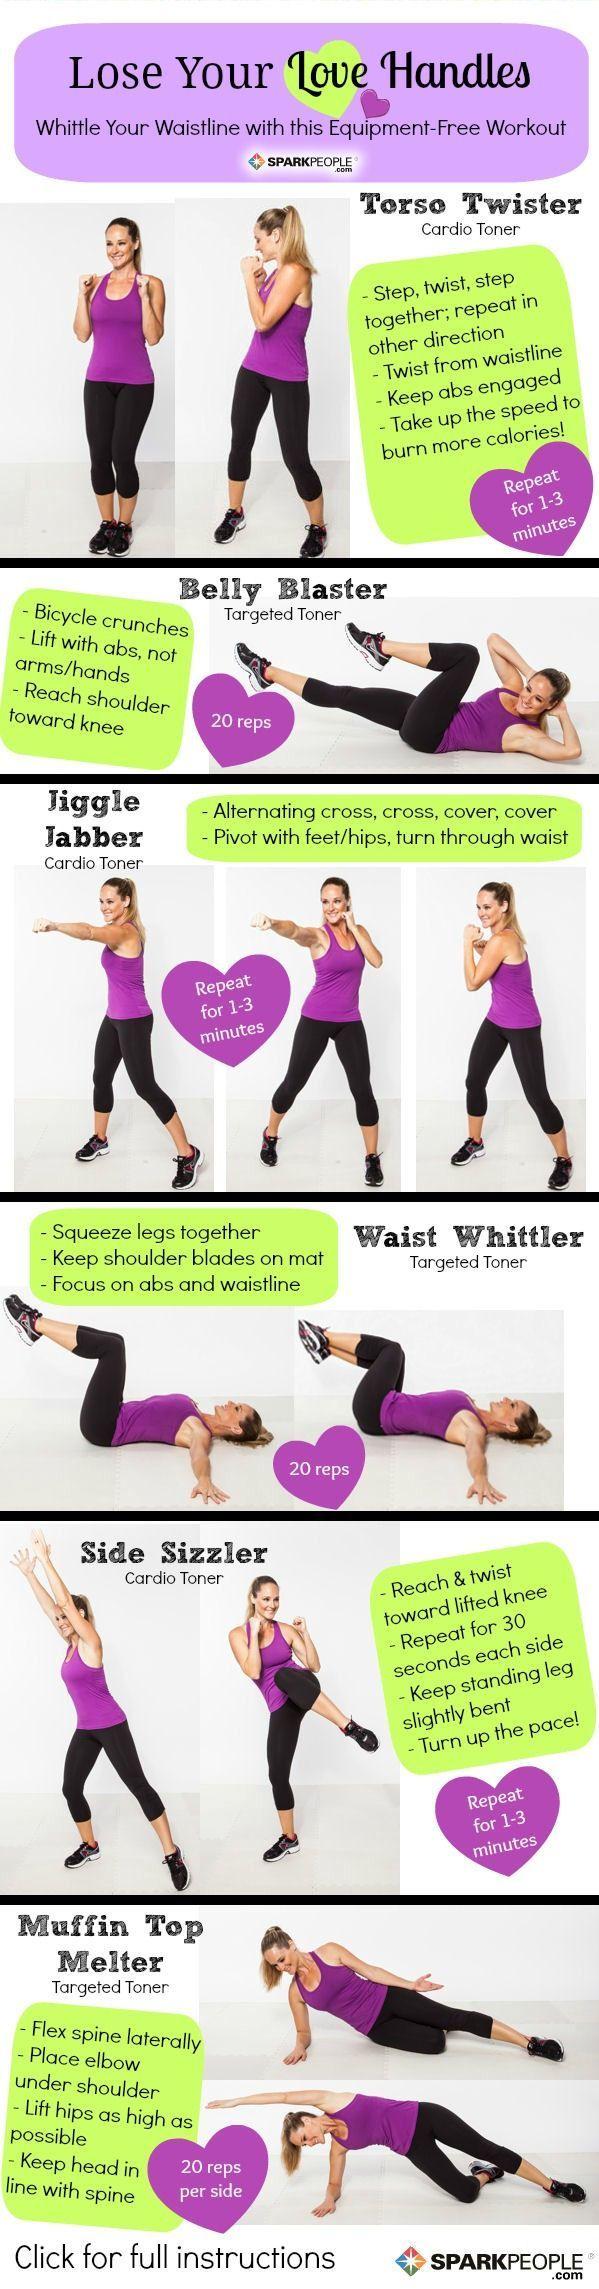 Wedding - The 'Lose Your Love Handles' Workout